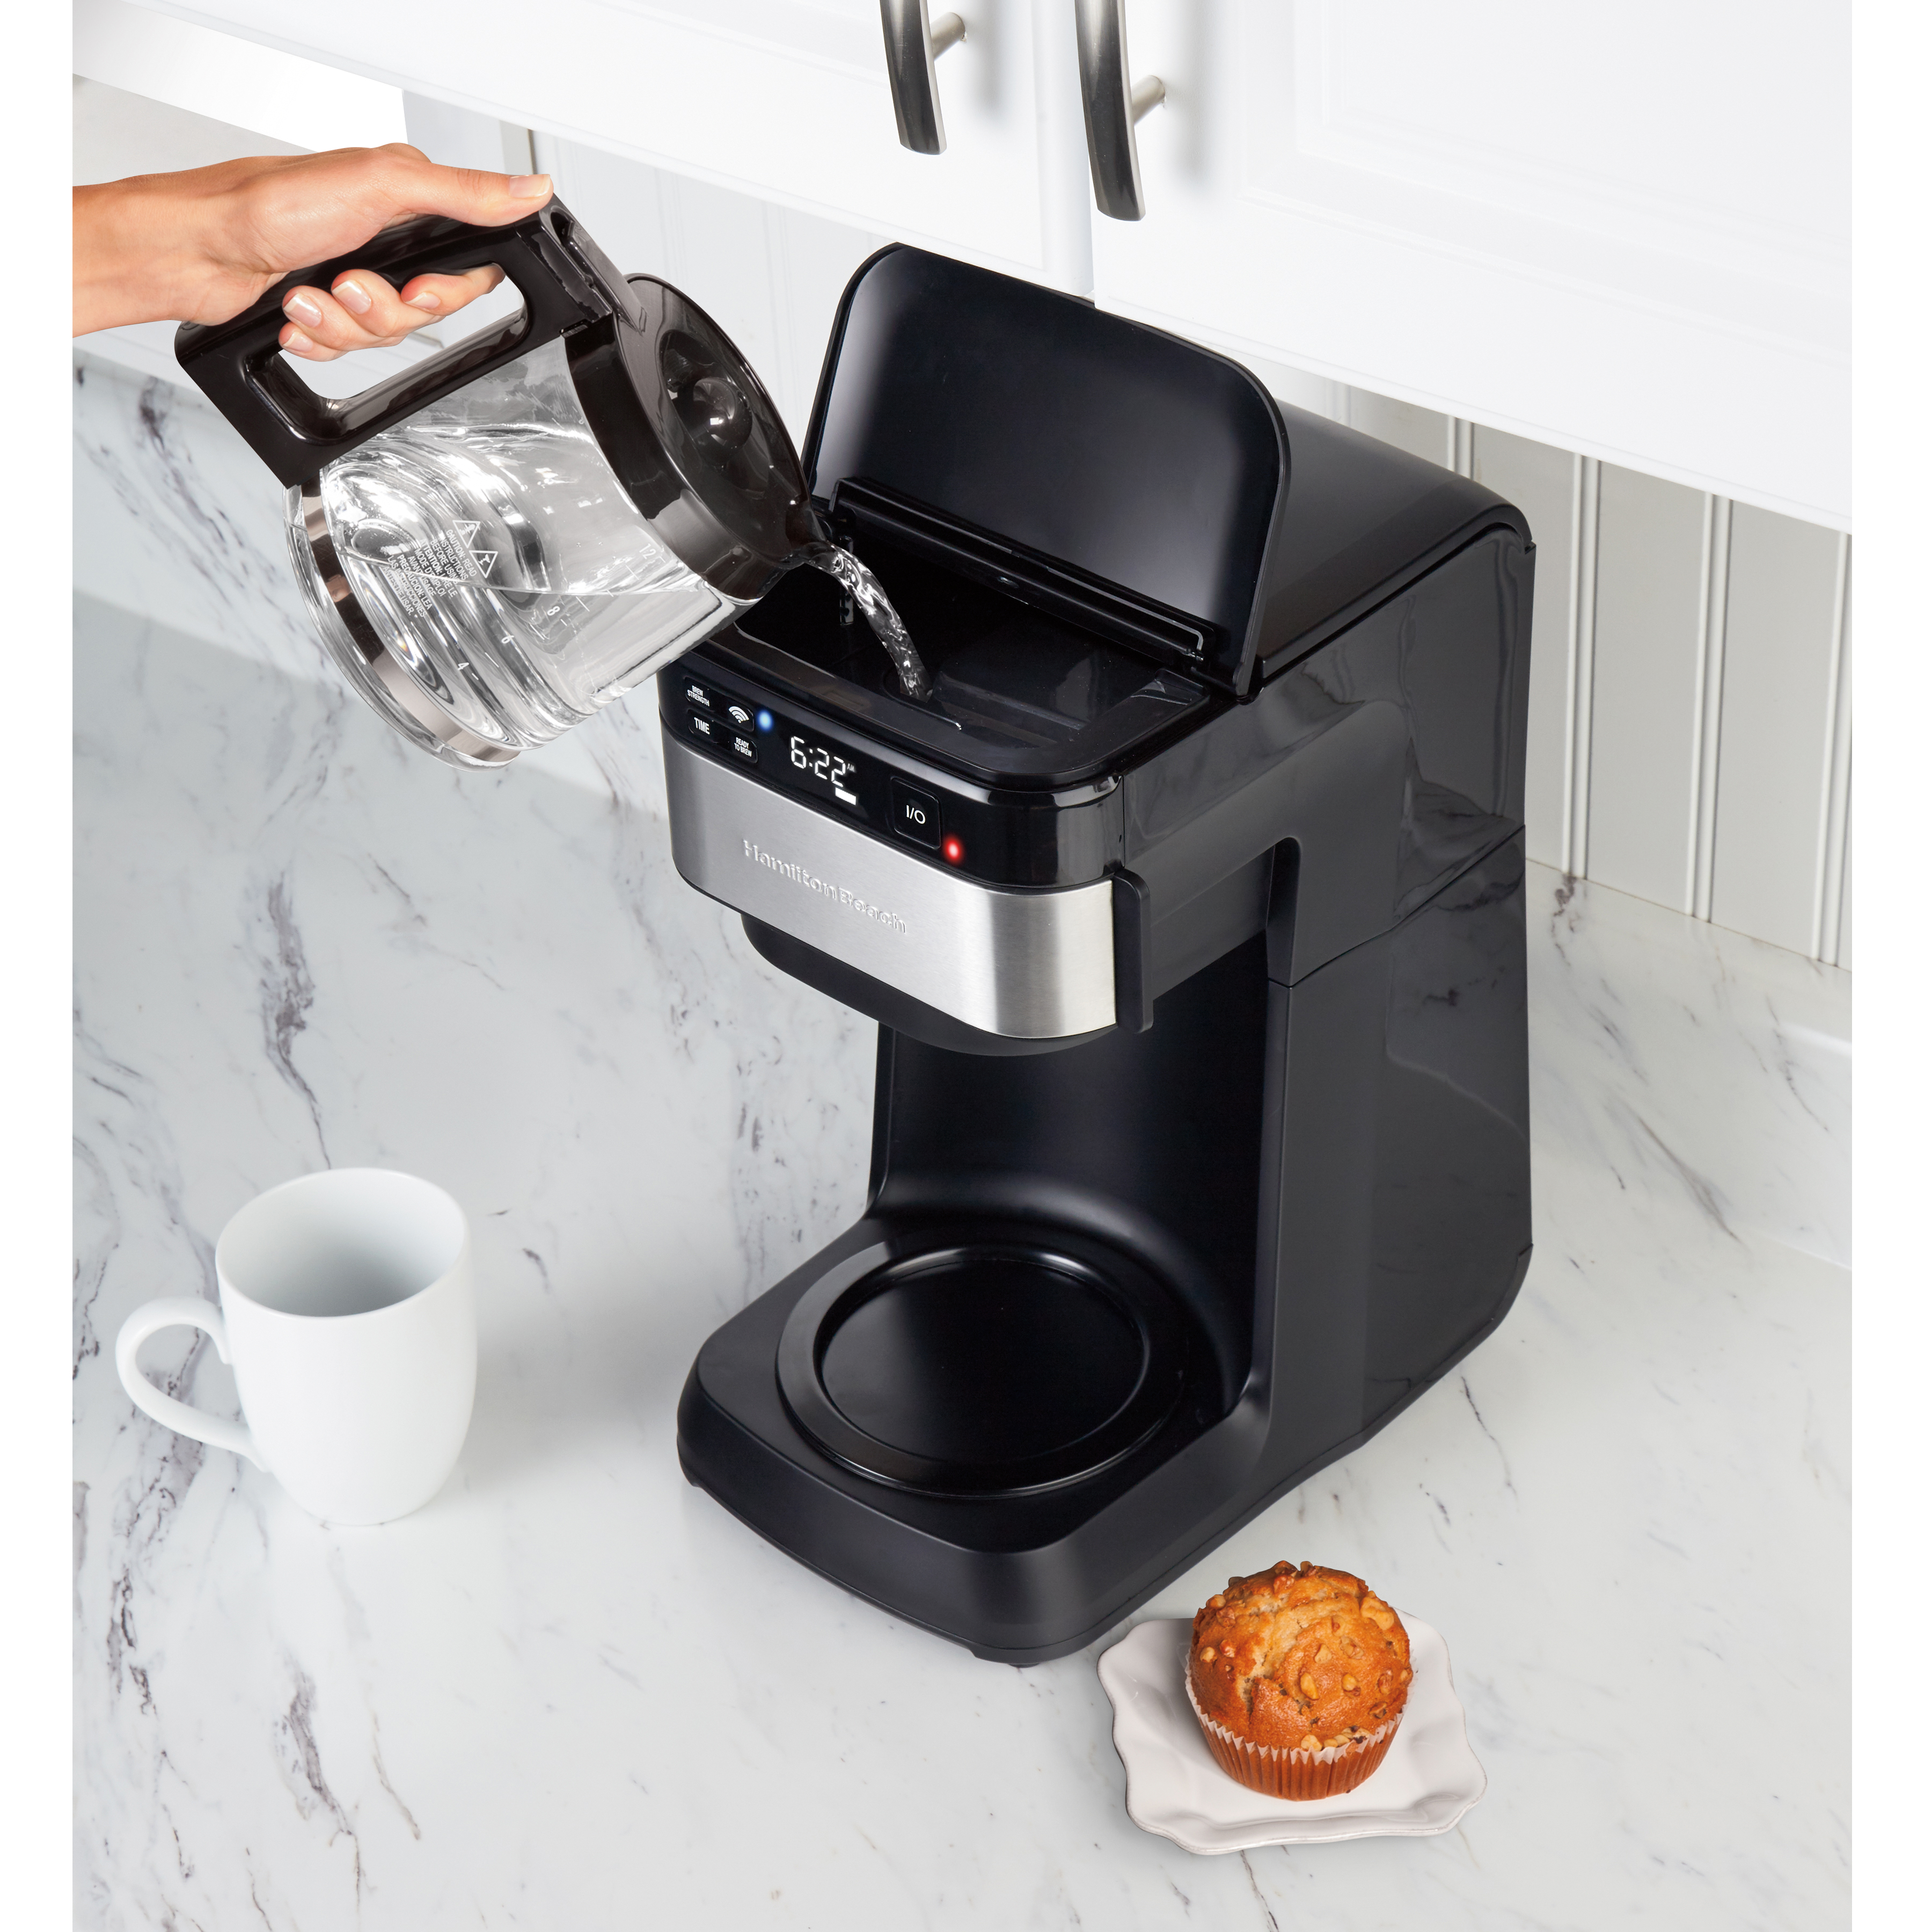 Enter for a Chance to Win a Hamilton Beach® Smart 12 Cup Coffee Maker